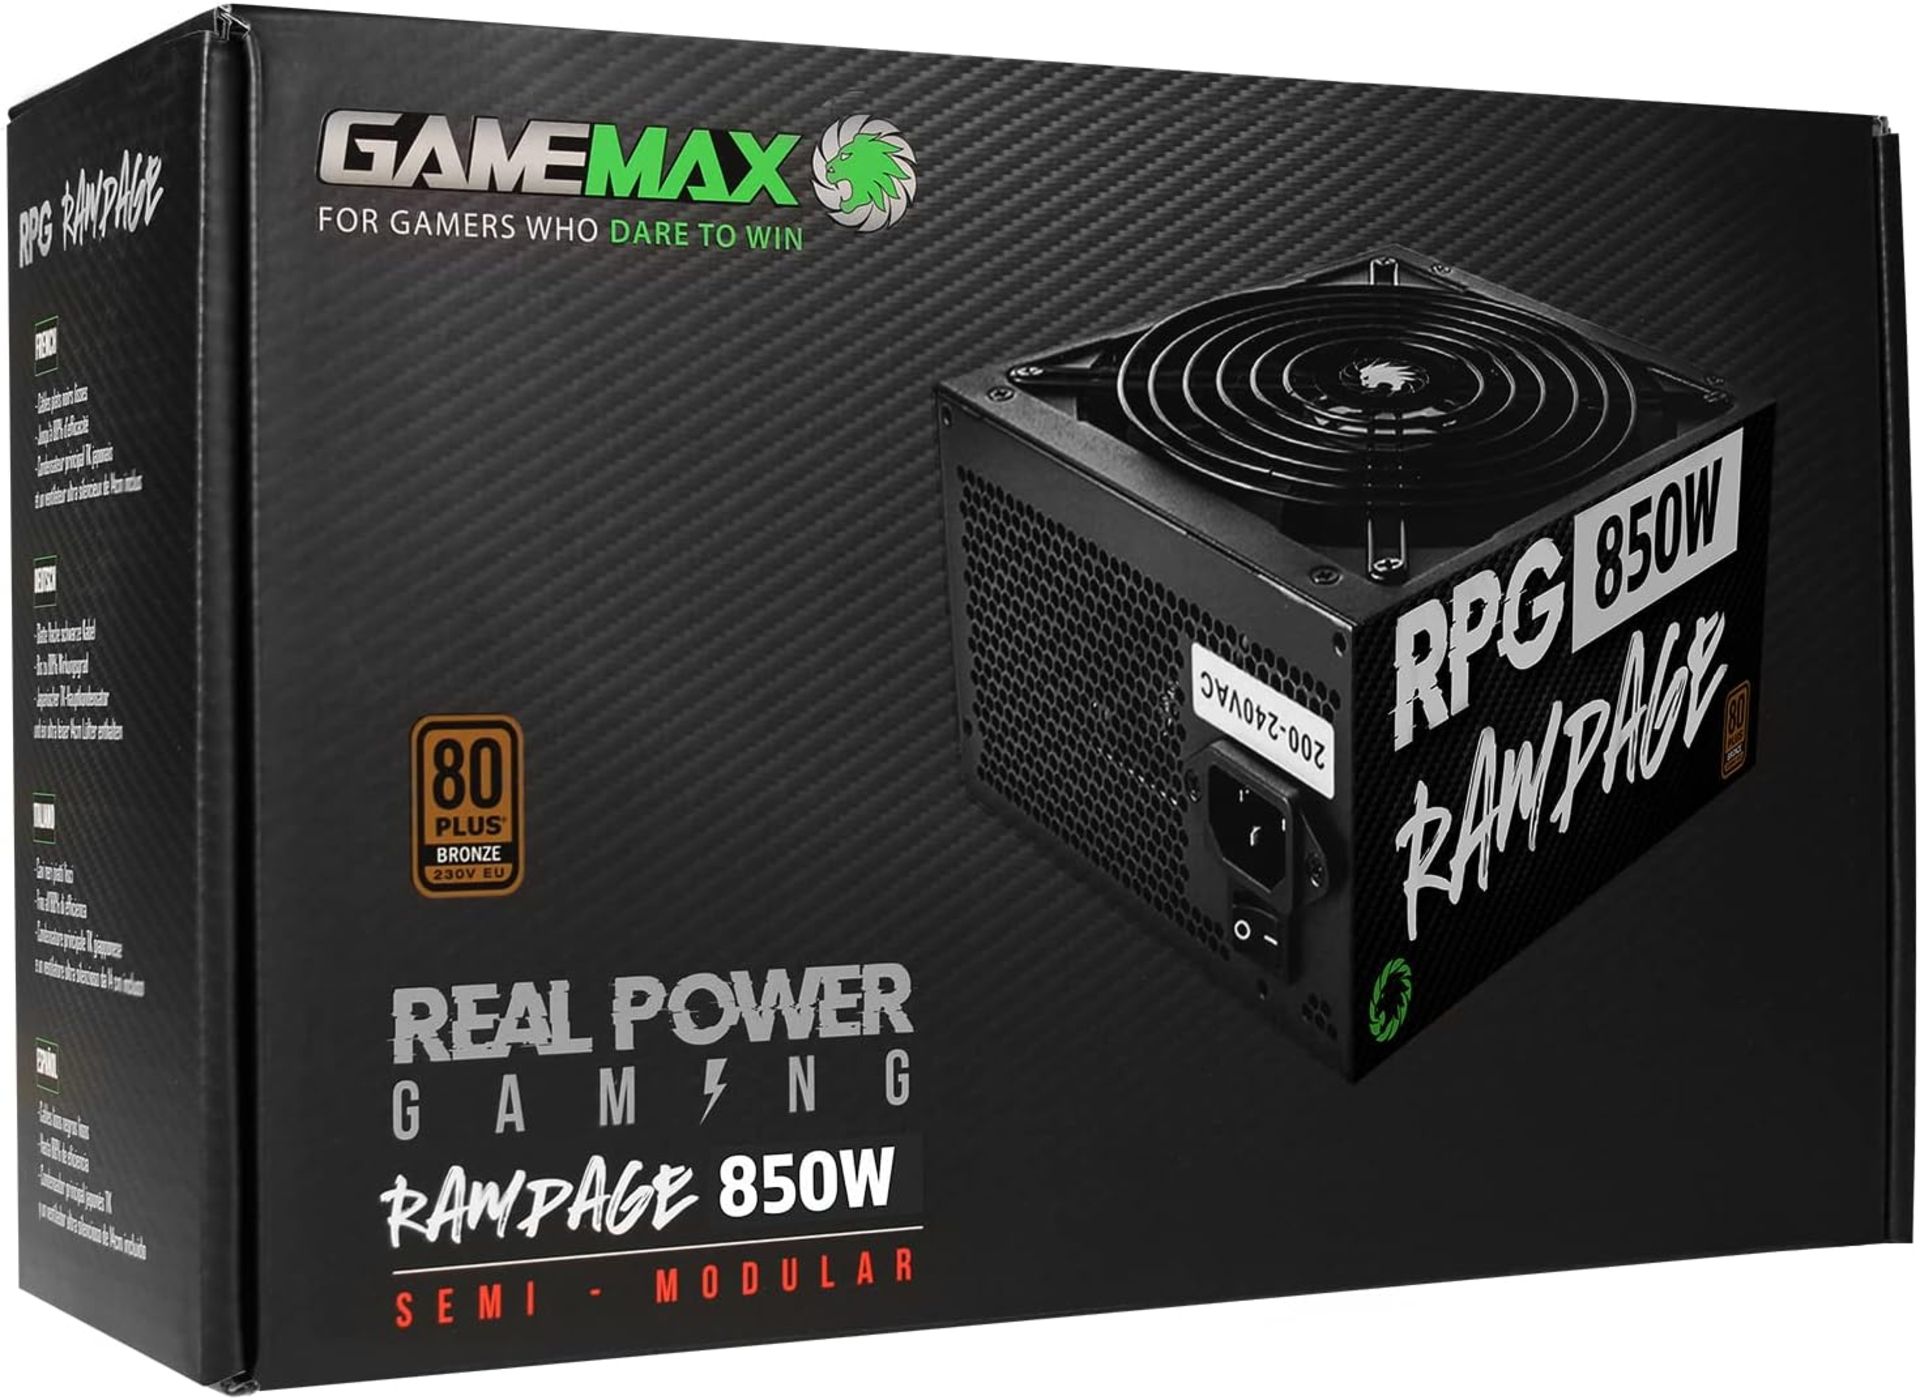 2x NEW & BOXED GAMEMAX Rampage 850w Power Supply. RRP £69.99 EACH. Semi-Modular - The 850W Rampage - Image 13 of 13